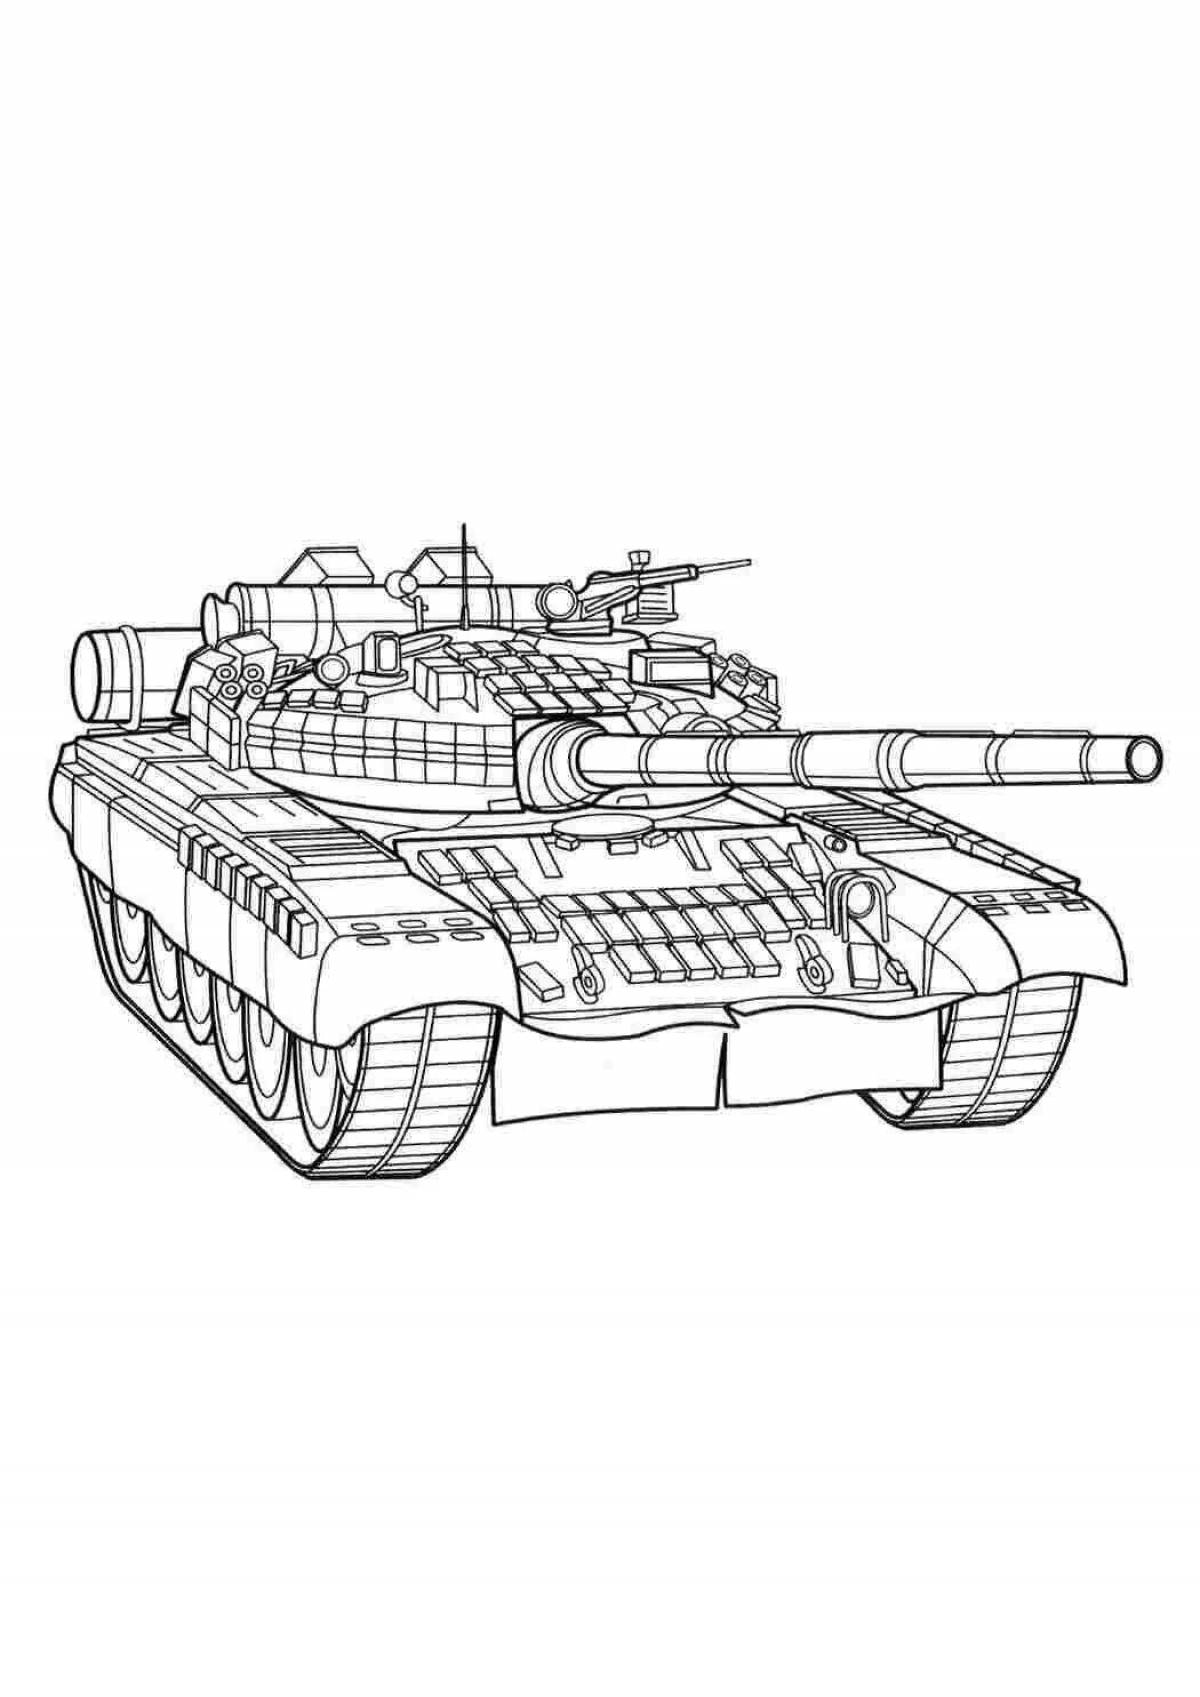 Coloring page awesome t80 tank